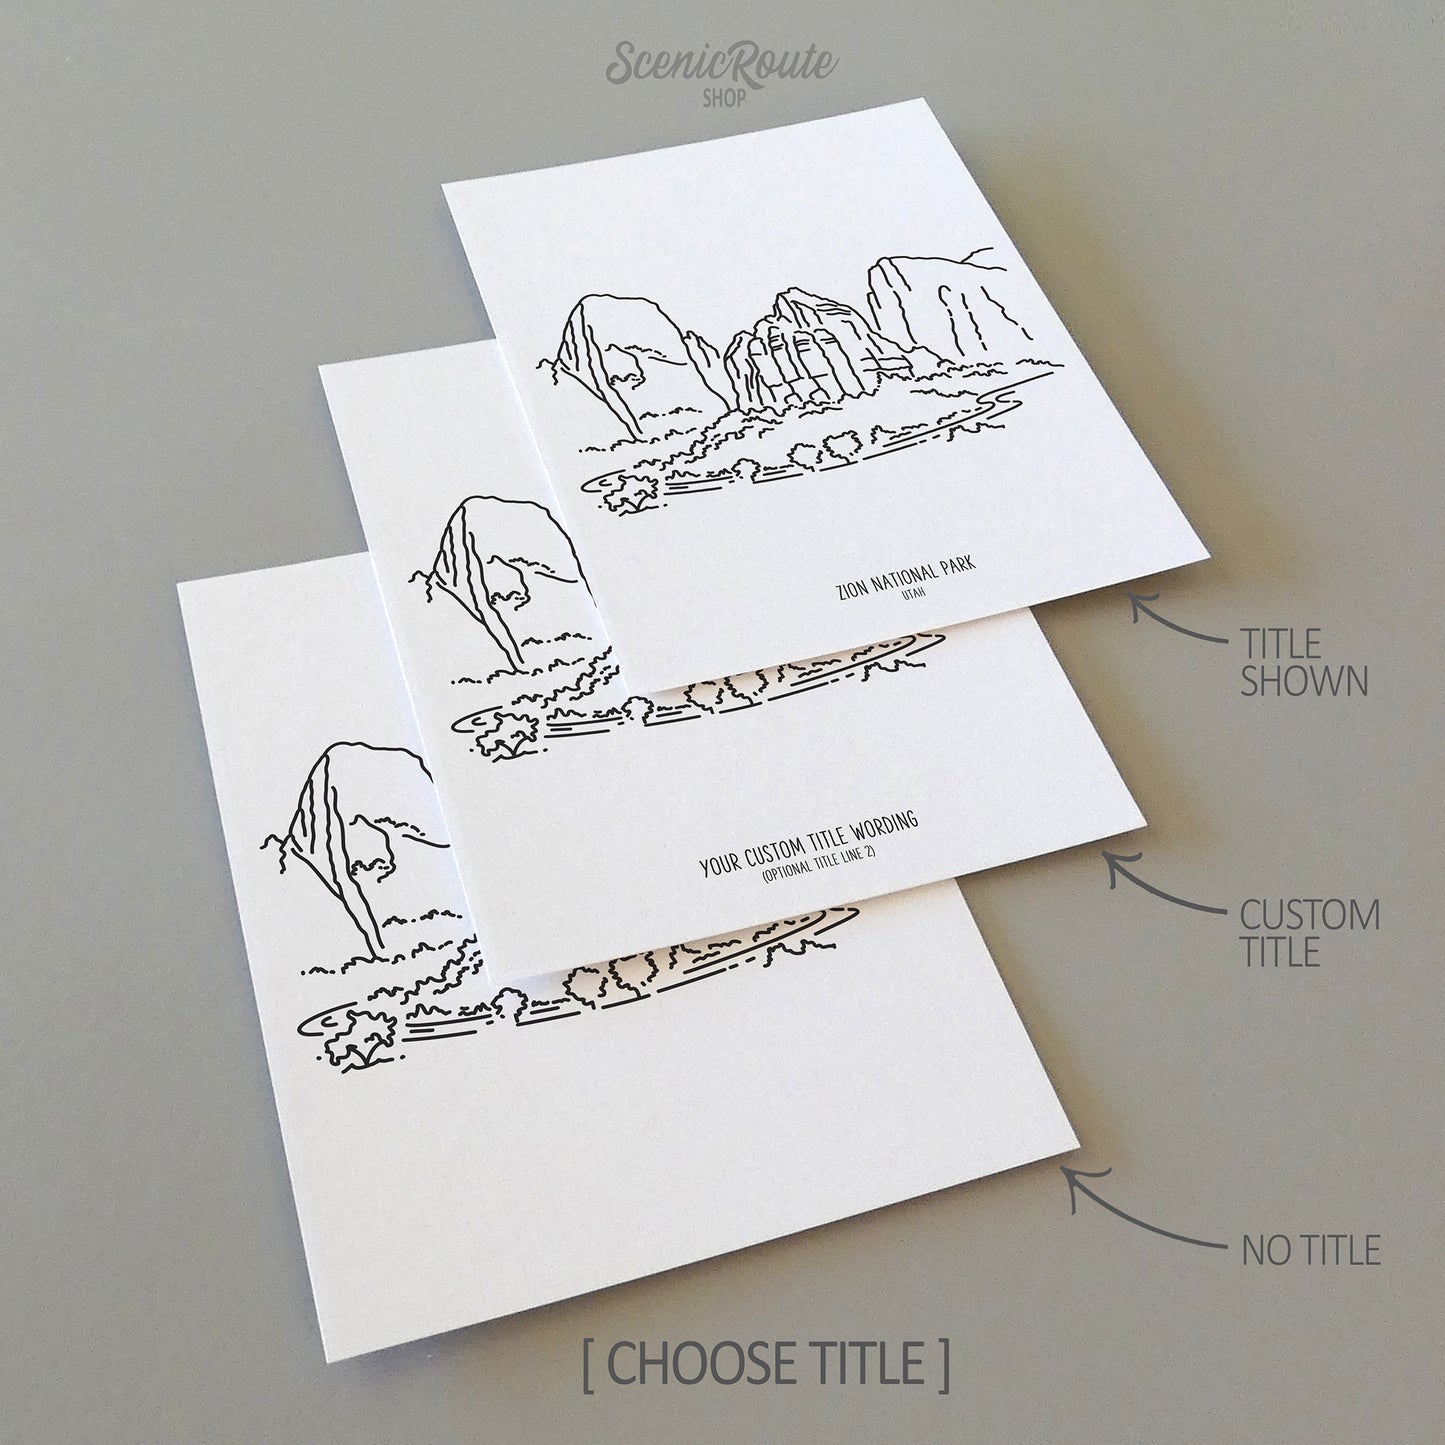 Three line art drawings of Zion National Park on white linen paper with a gray background. The pieces are shown with title options that can be chosen and personalized.